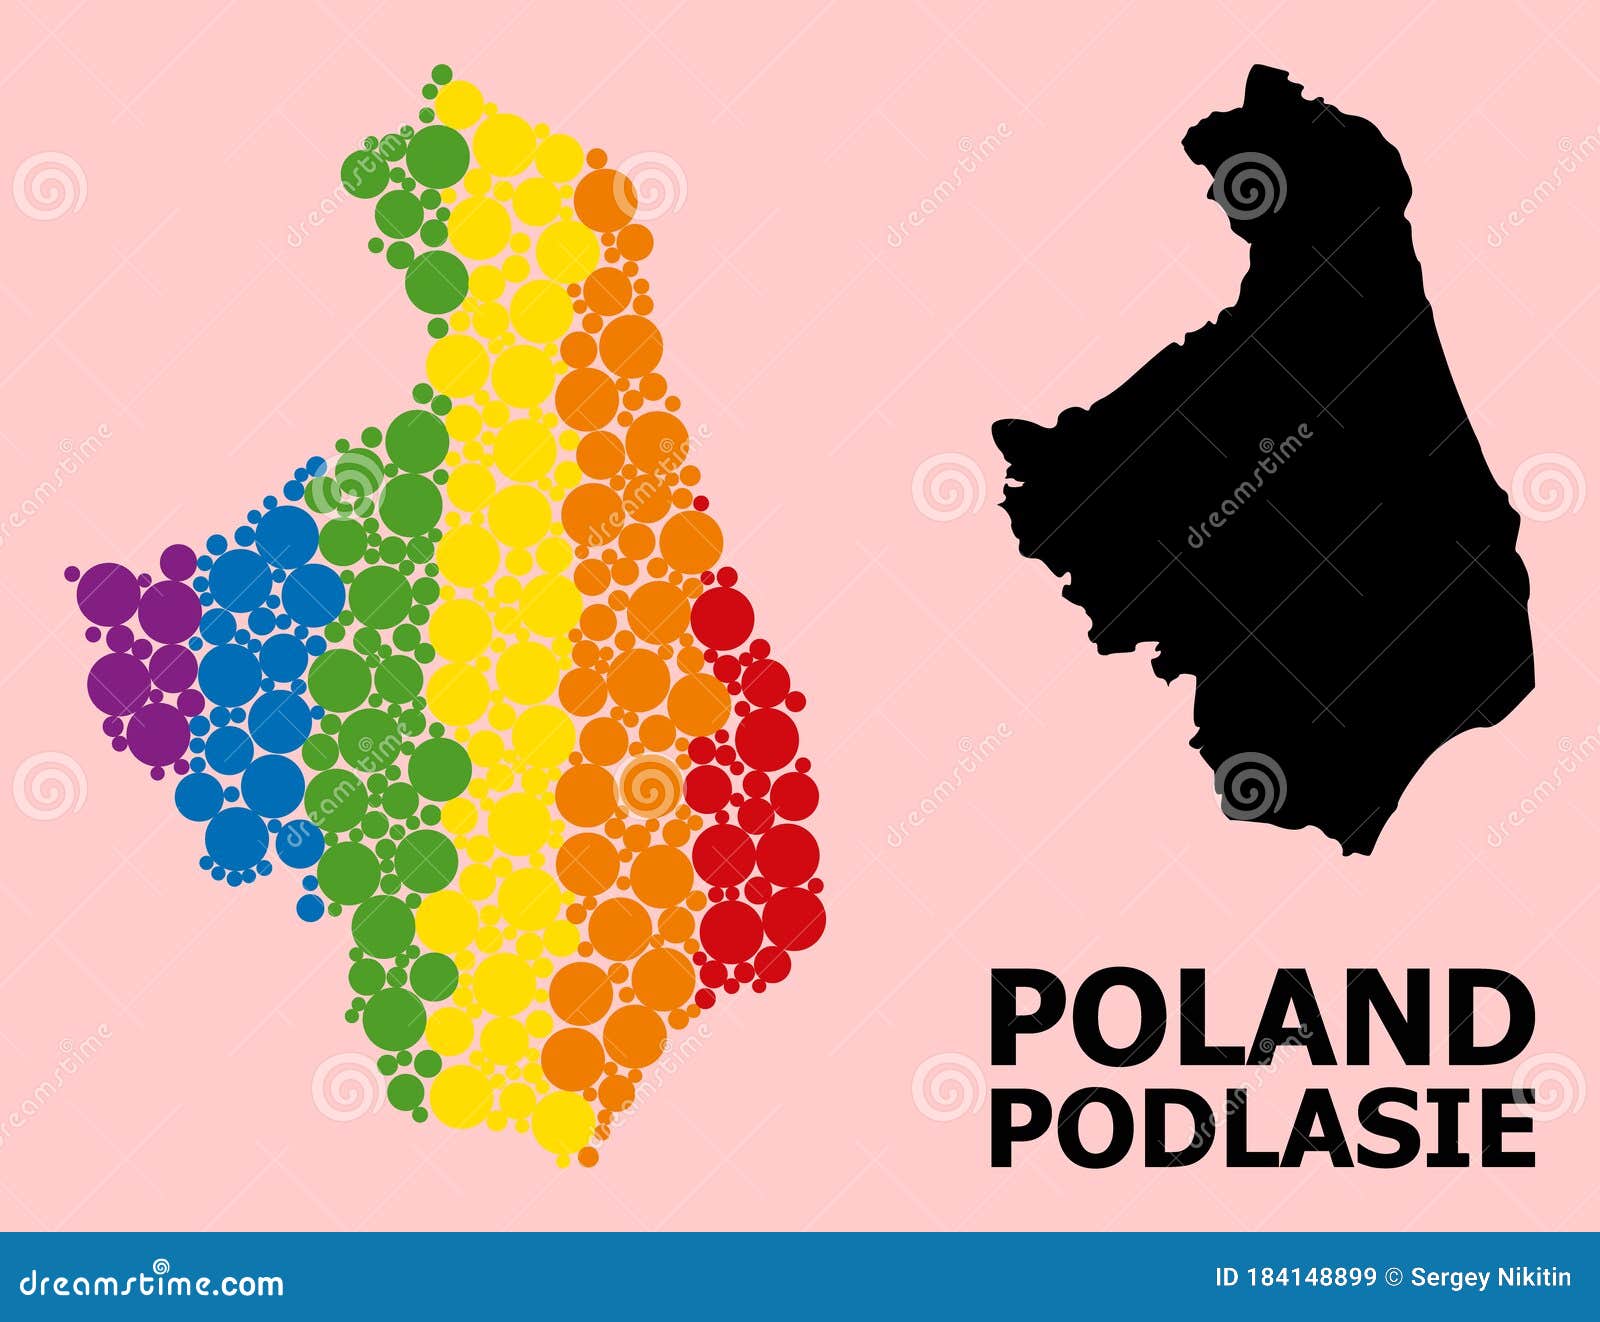 Spectrum Pattern Map Of Podlasie Province For Lgbt Stock Vector Illustration Of Dotted 9882